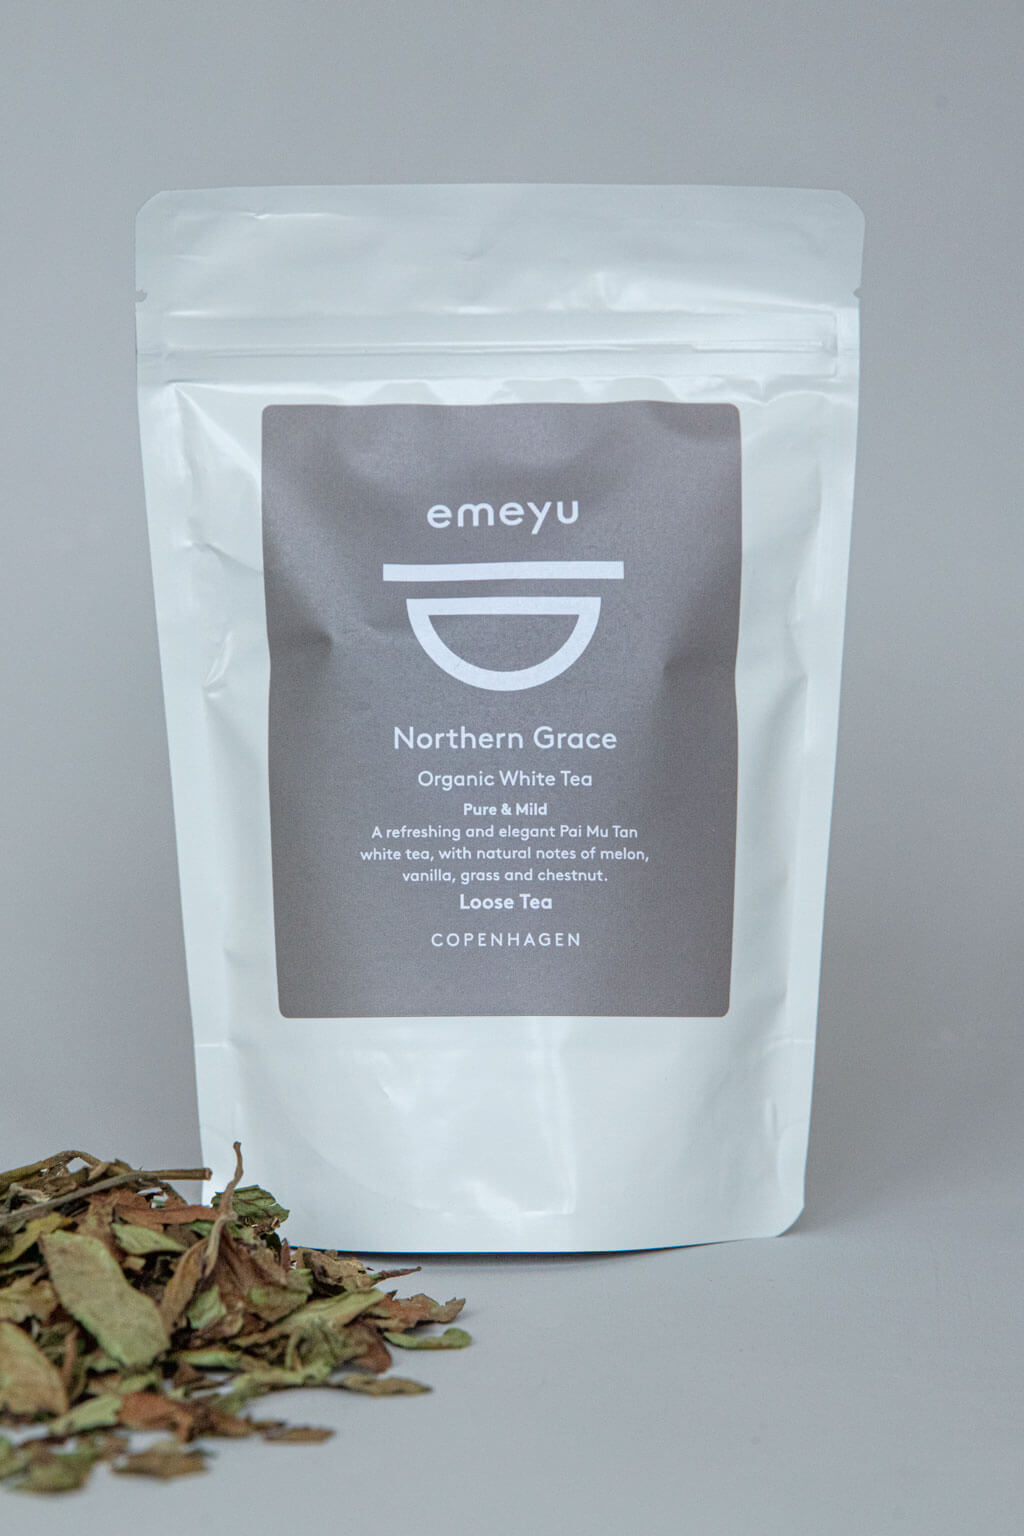 Emeyu’s Northern Grace is an organic, whole leaf, high quality, Pai Mu Tan white tea. A pure, mild and elegant tea It is high in antioxidants and low in caffeine; essentially, a tea that nurses you and spoils you in every aspect. 40 grams whole leaves loose tea in a sustainable doypack bag.